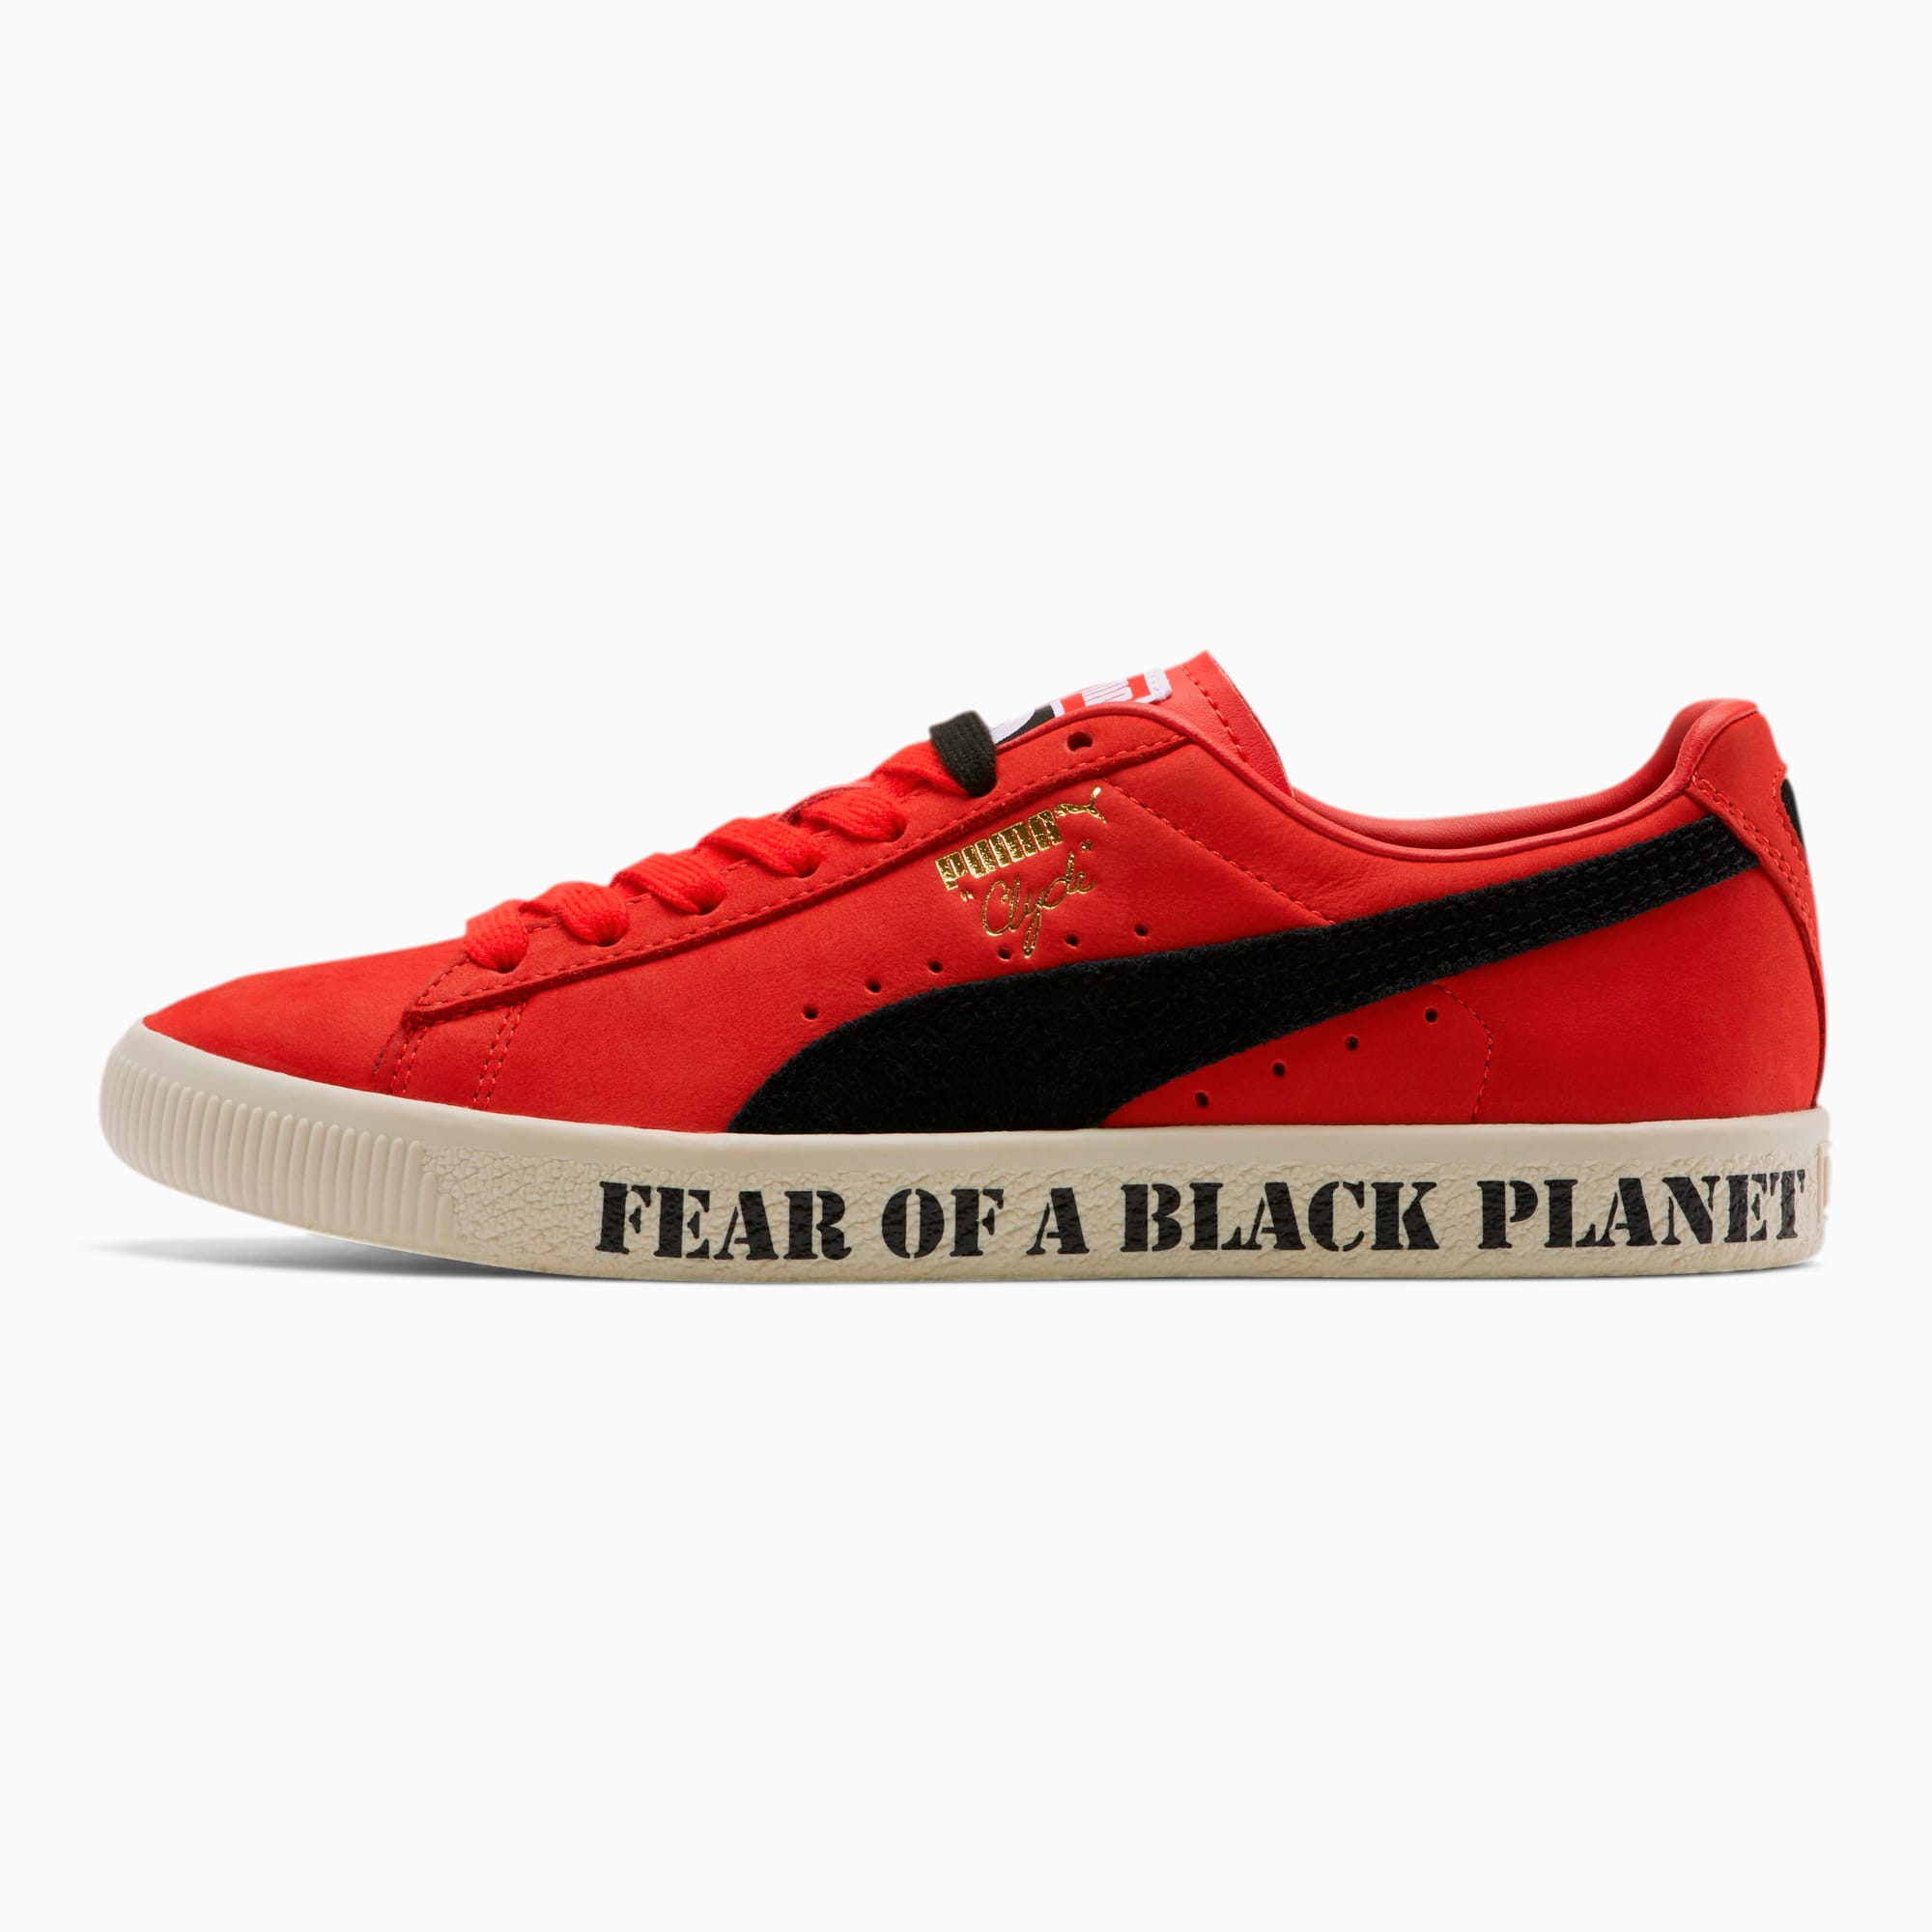 puma clyde shoes red